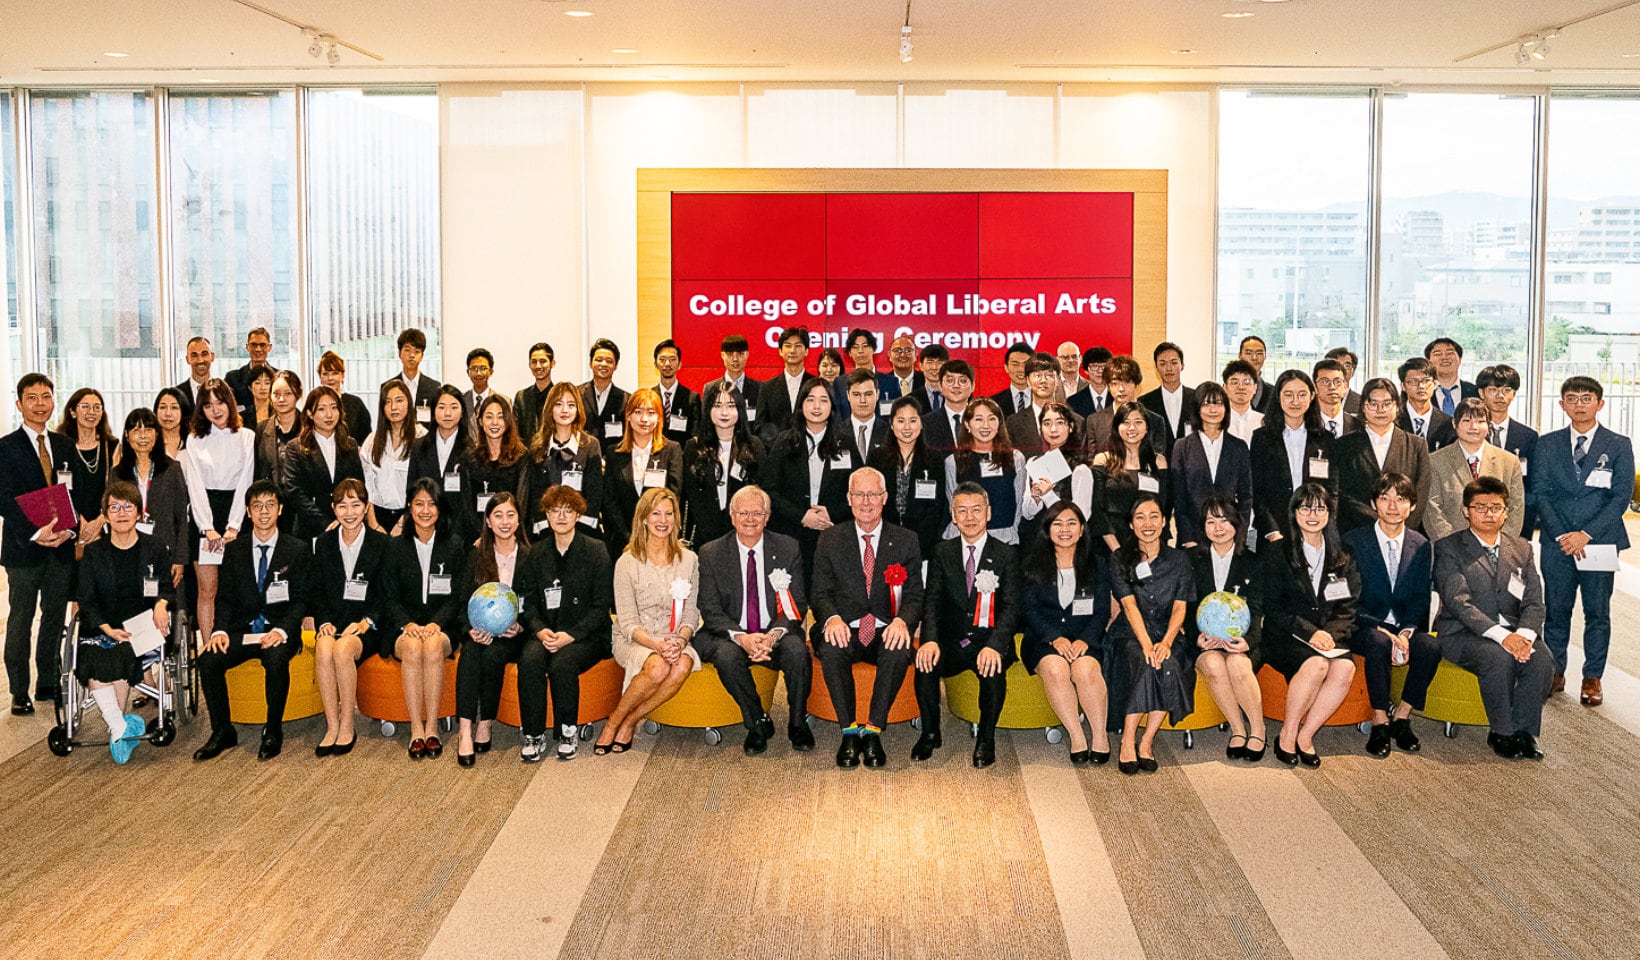 Group photo of students, faculty, and administrators at the GLA opening ceremony